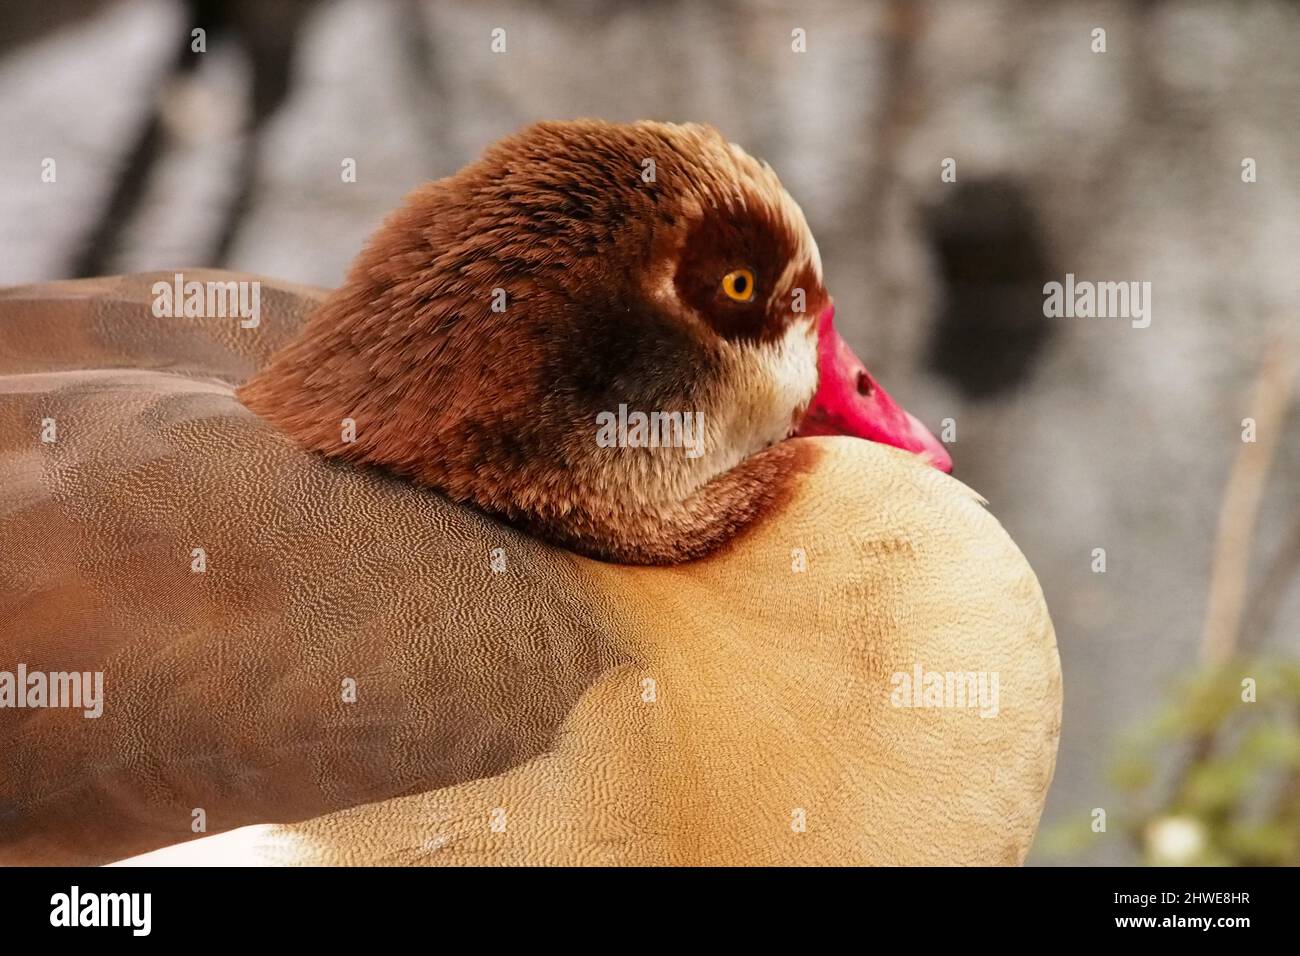 A close up view of the head and back of an Egyptian goose with its feathers fluffed up to keep warm Stock Photo